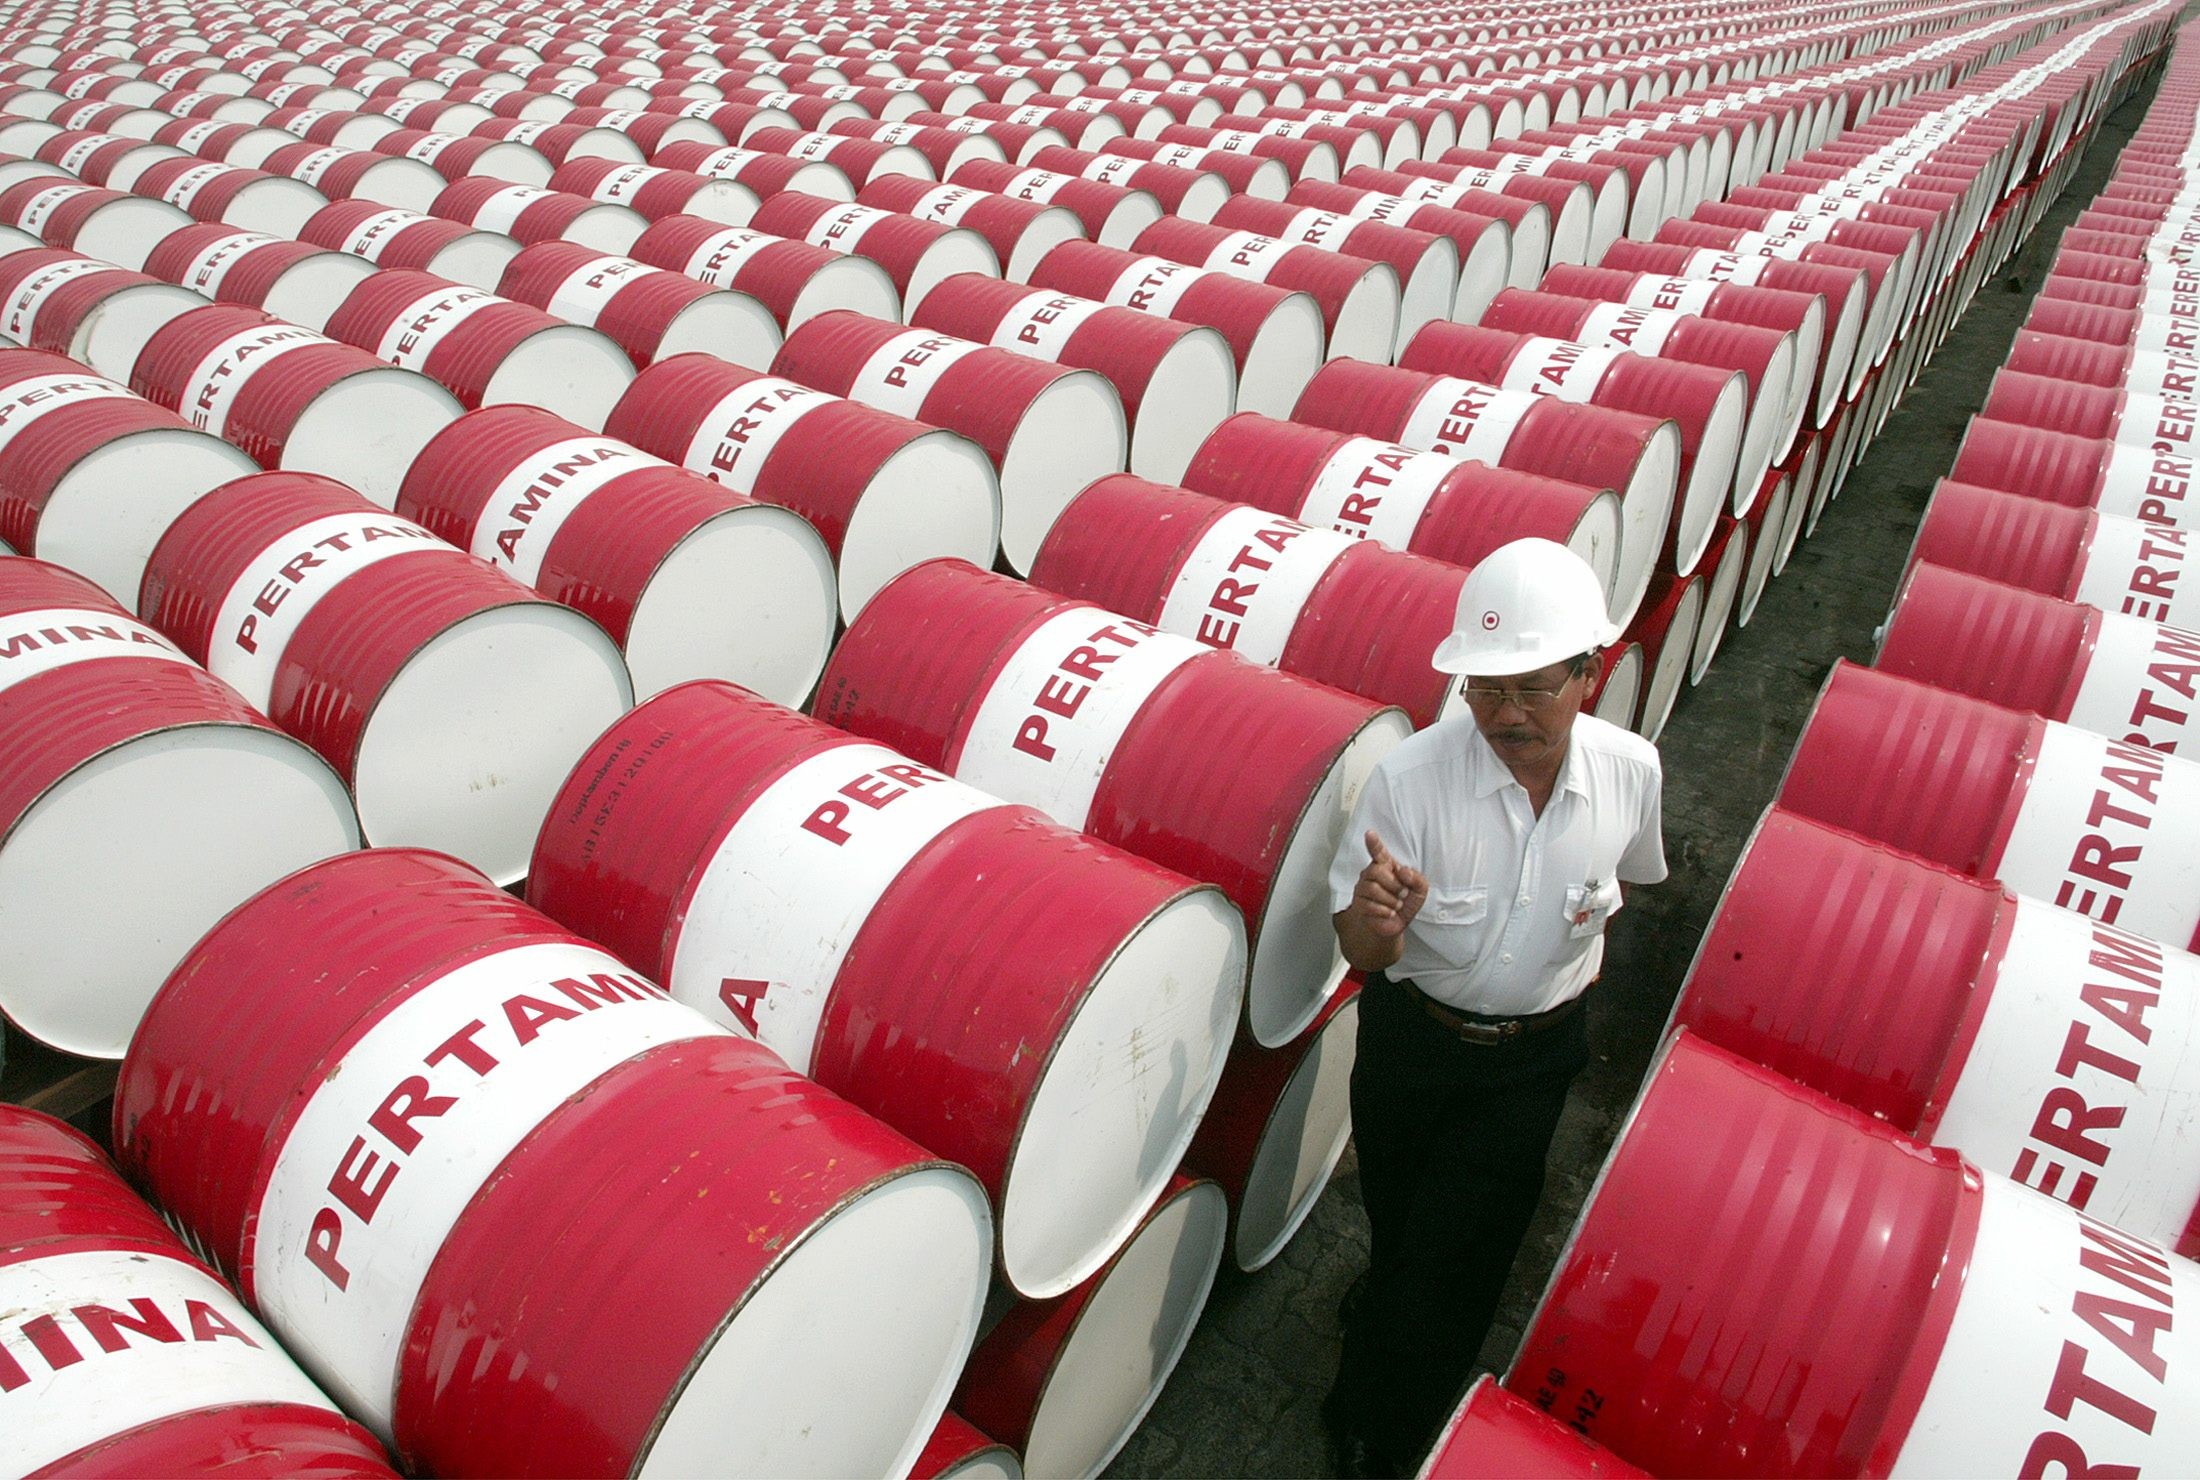 An employee of Indonesia’s state-owned oil company Pertamina walks past oil drums at the company’s main depot in north Jakarta. Photo: Reuters